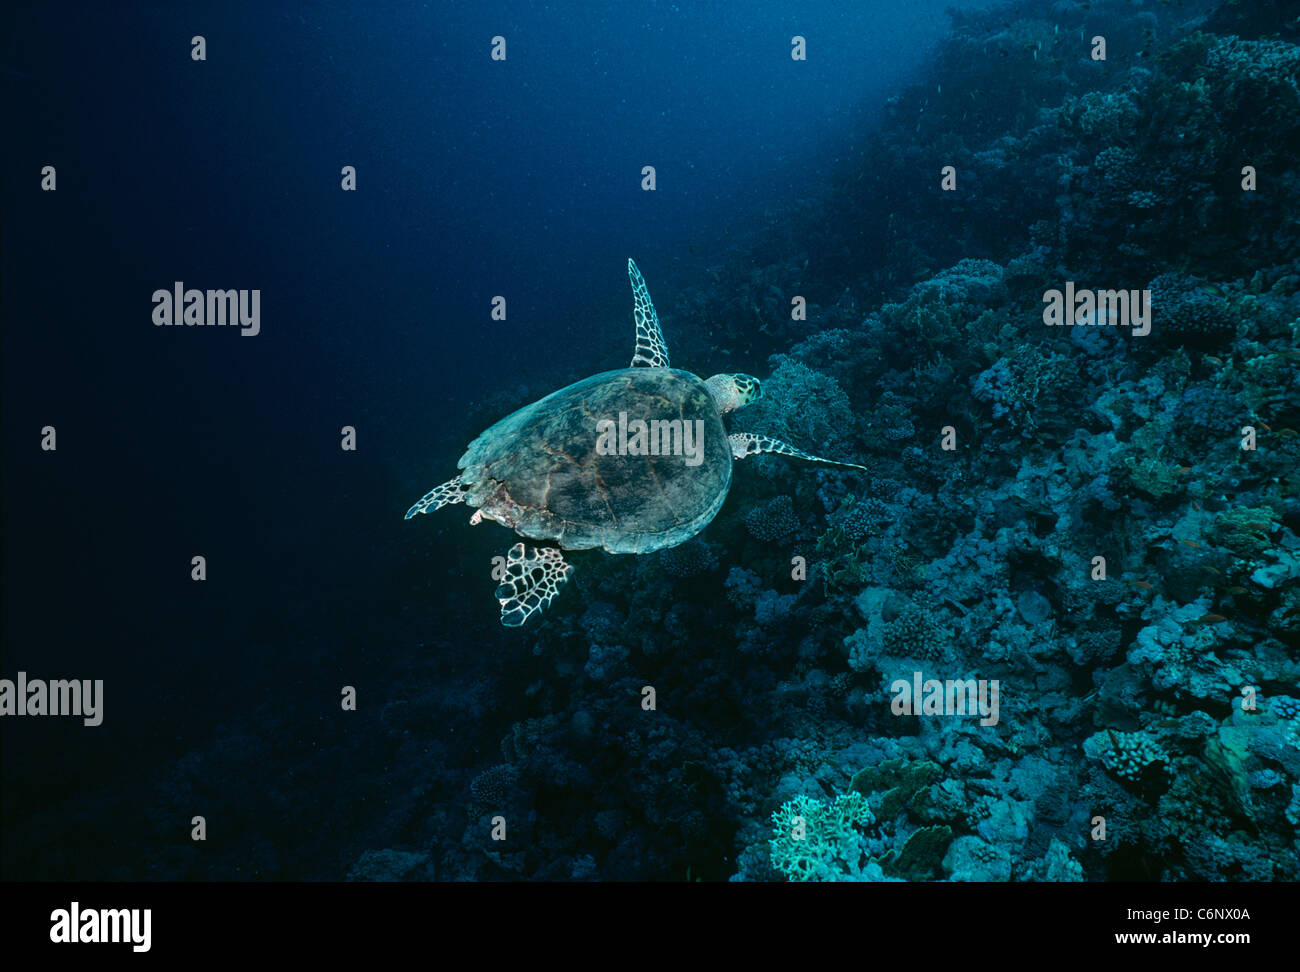 Hawksbill Turtle (Eretmochelys imbricata) swims along drop-off in coral reef at night. Egypt, Red Sea Stock Photo